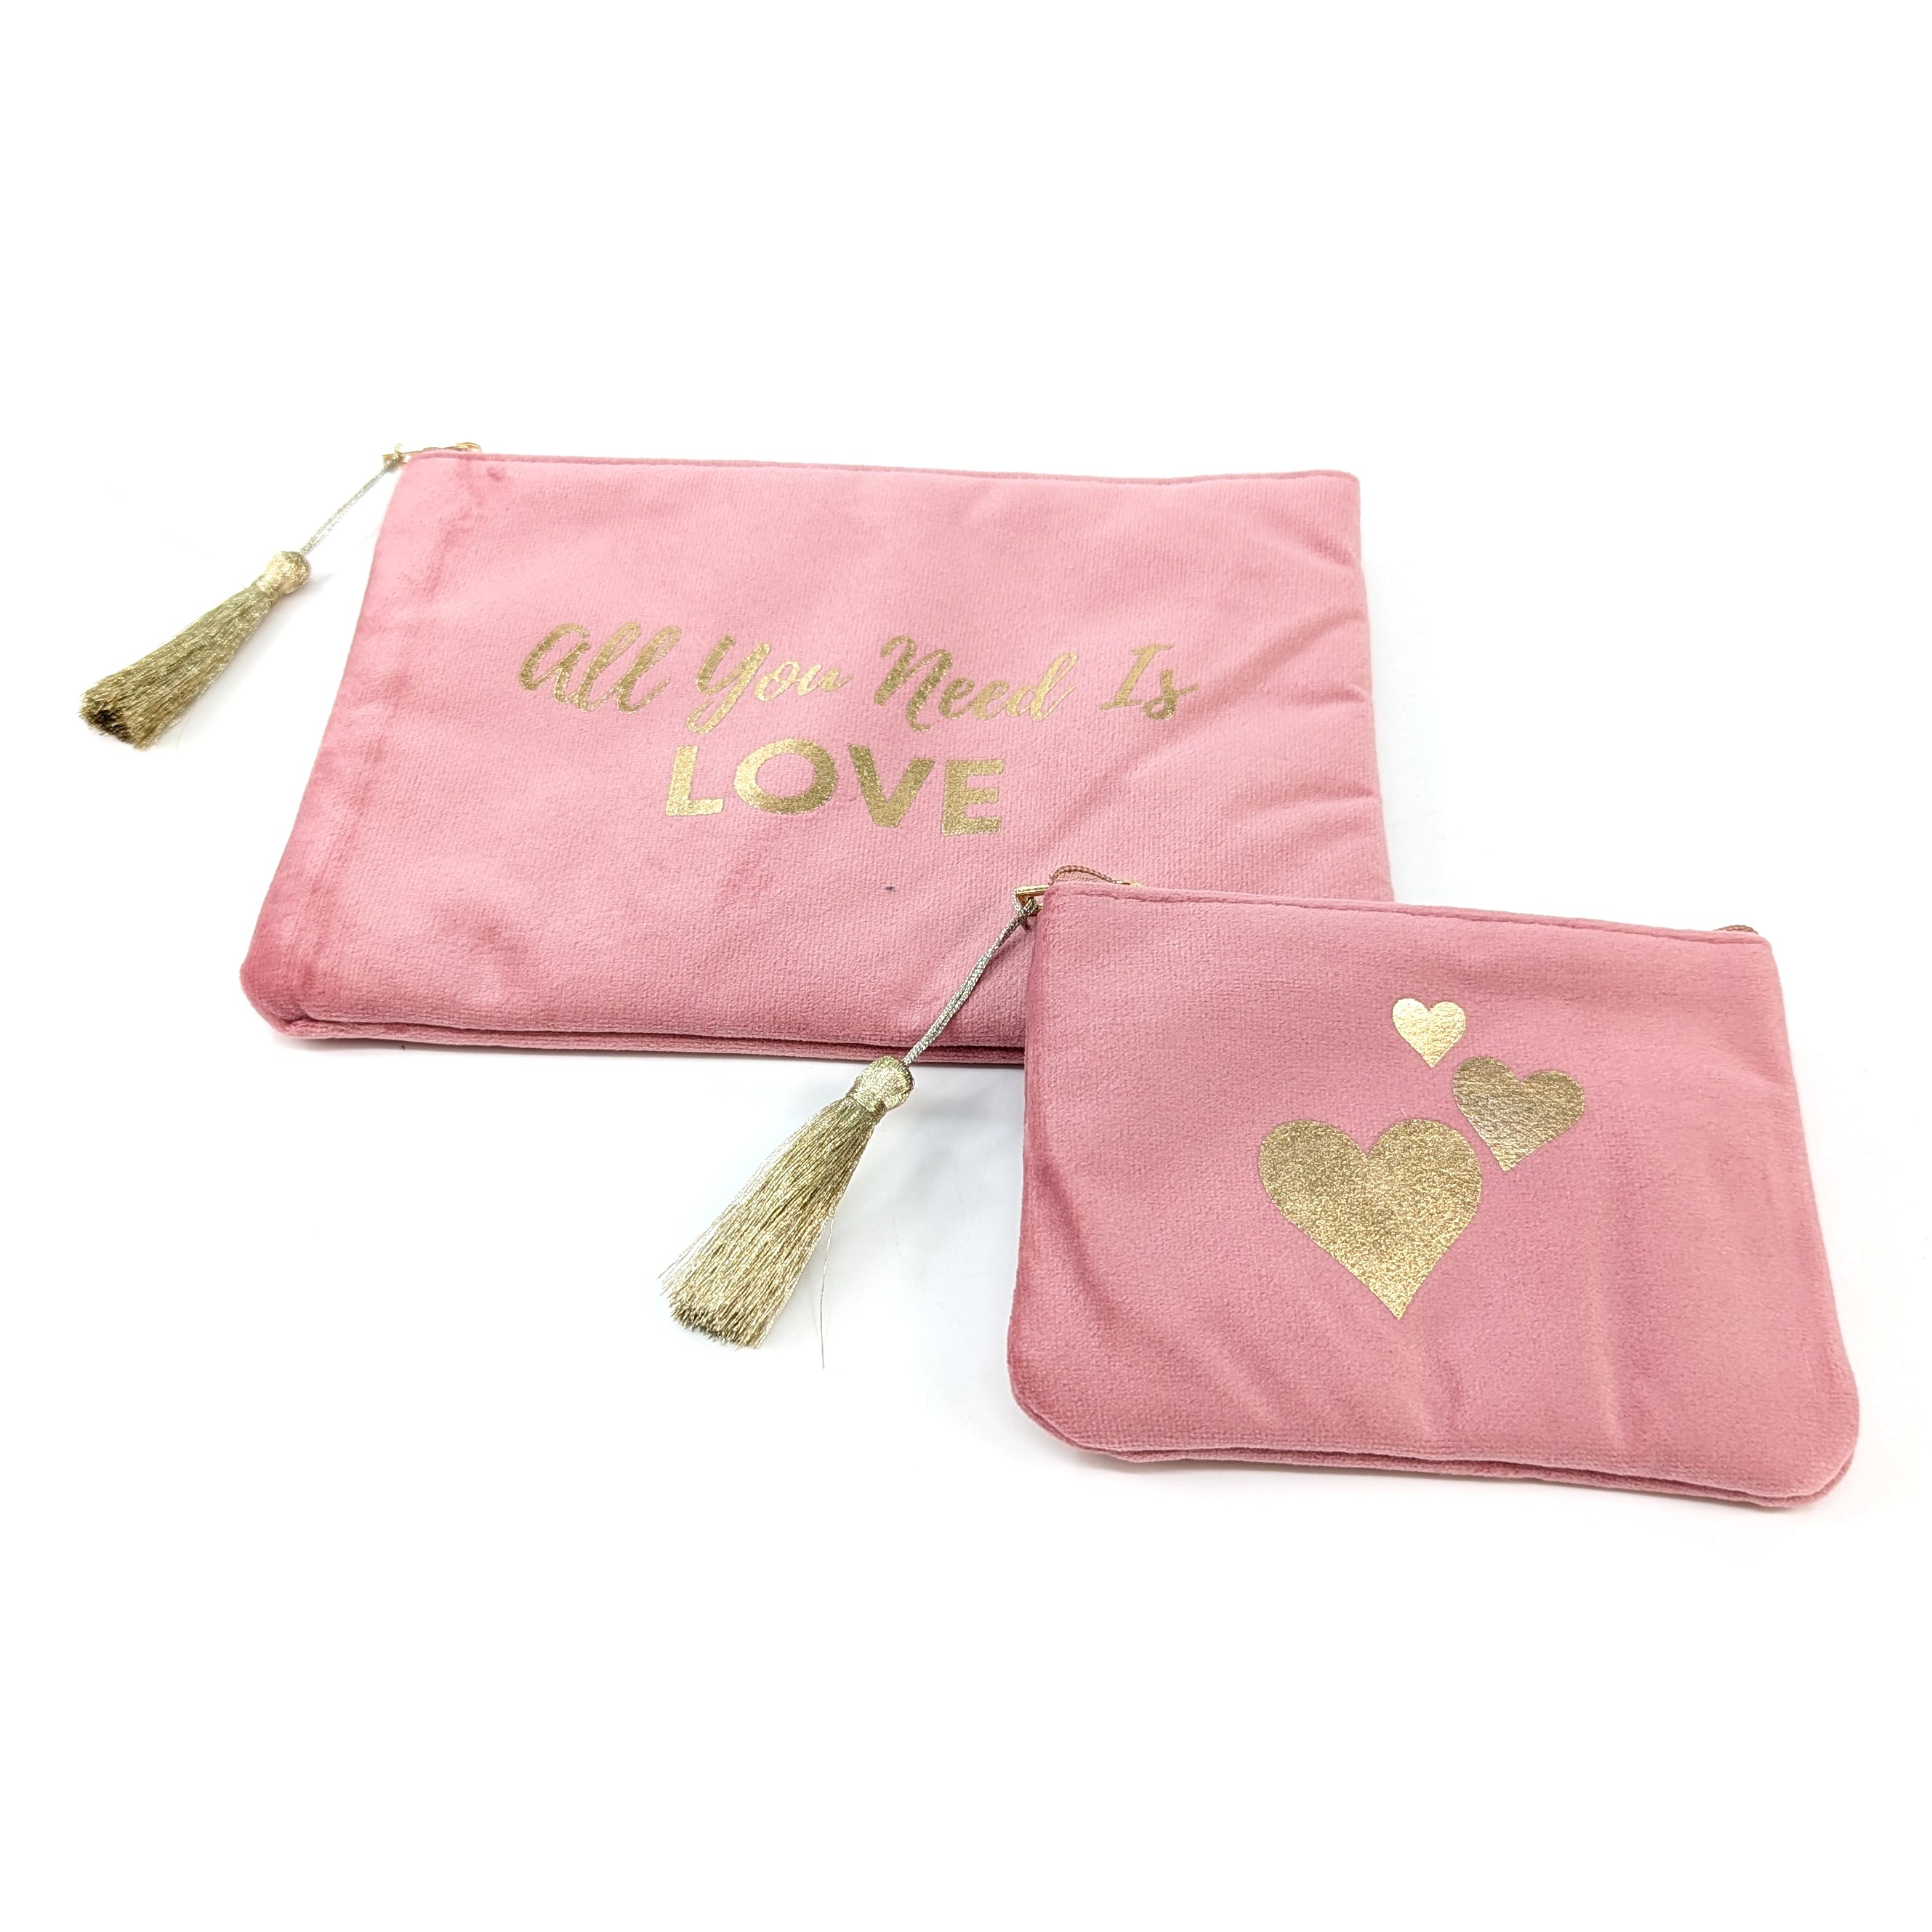 All You Need is Love' Set of 2 Velvet Bags/Purses